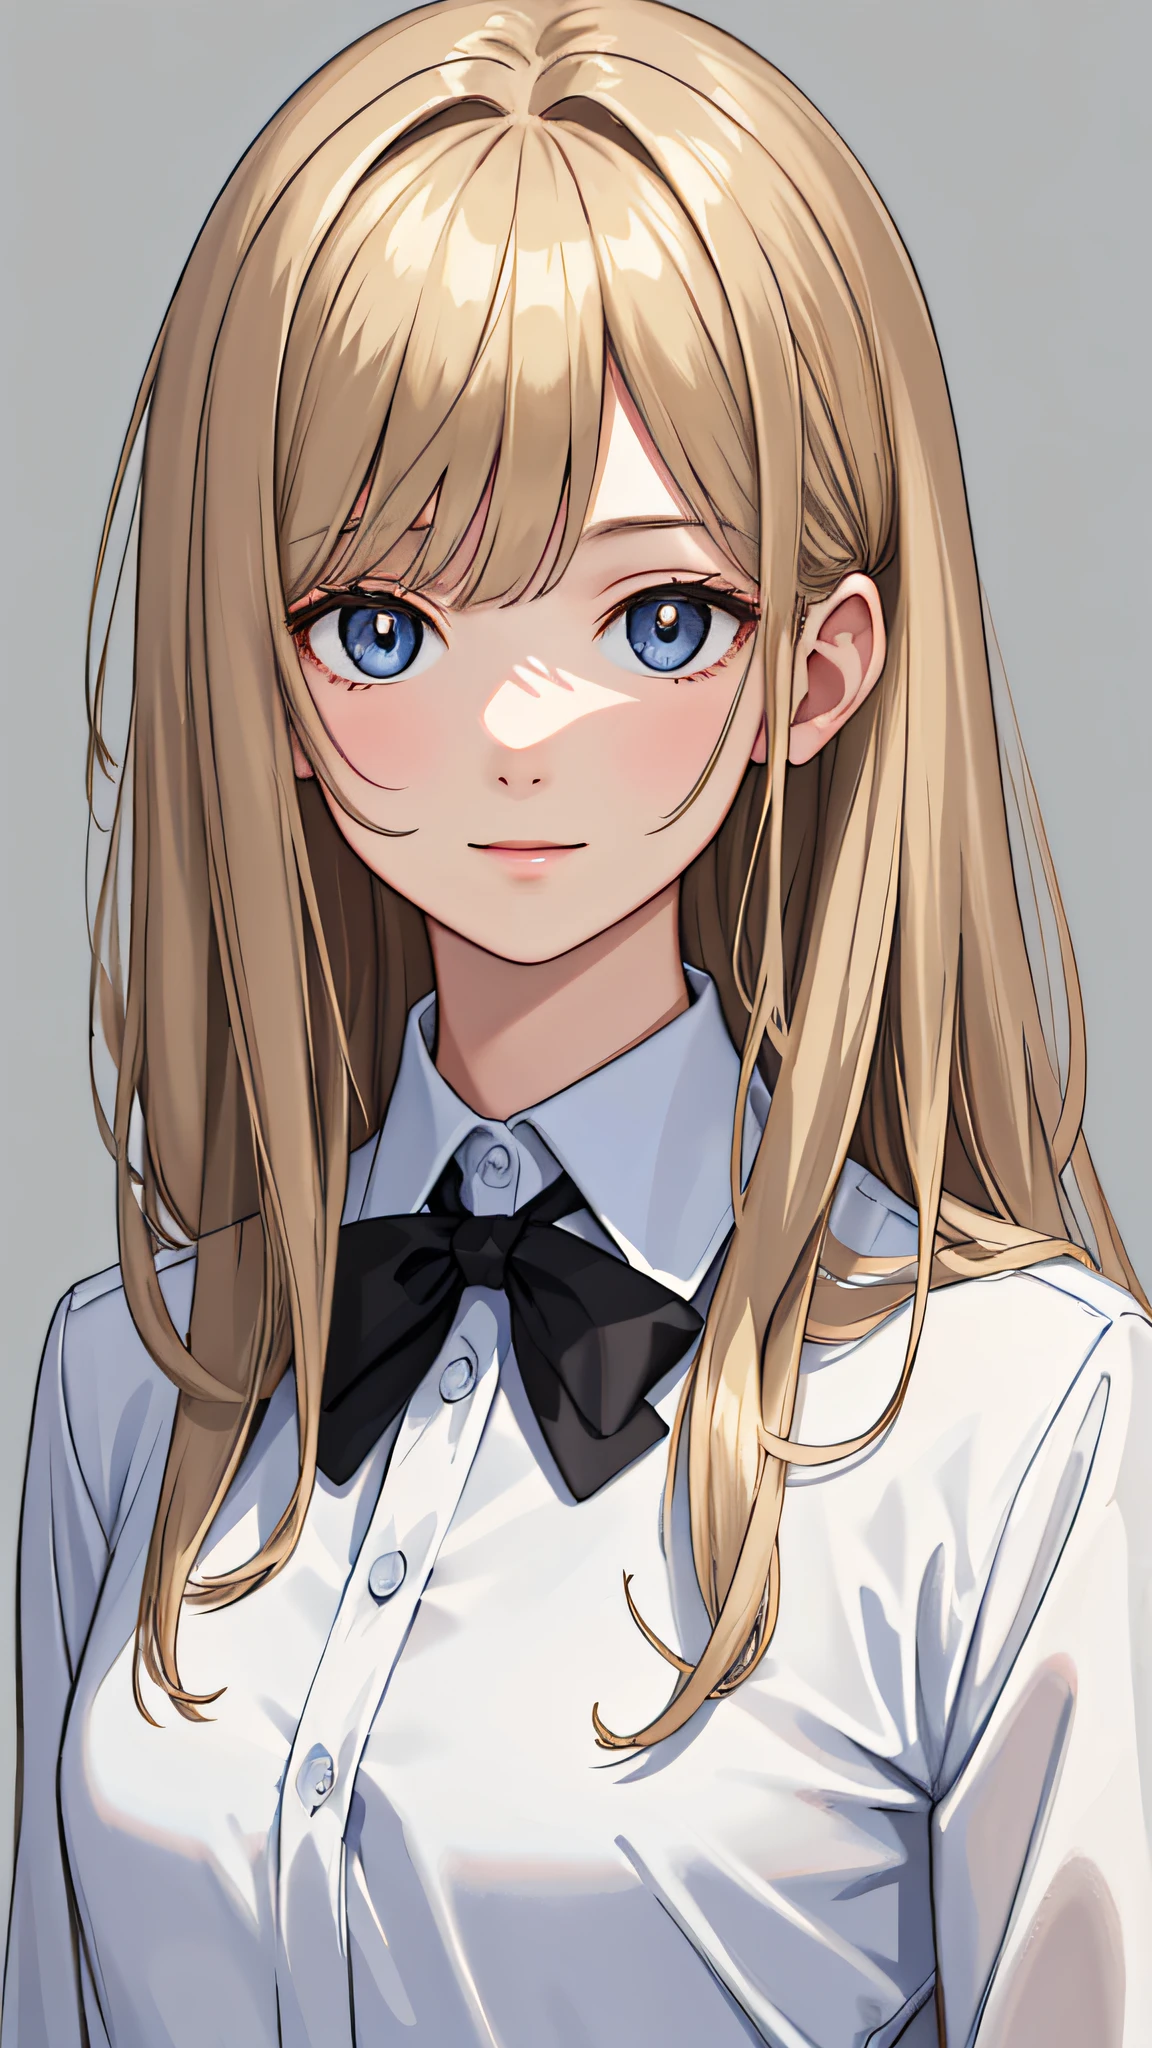 (masterpiece:1.1), (best quality), (ultra detailed),(disheveled hair),(illustration), (1girl), adult, standing, portrait view, looking at viewer, close up, happy, (interview), (simple background),beautiful detailed eyes, delicate beautiful face, focus on face, white dress shirt, professional clothing, dirty blonde hair, dark blonde hair, medium length hair, bangs, superflat style, gray background